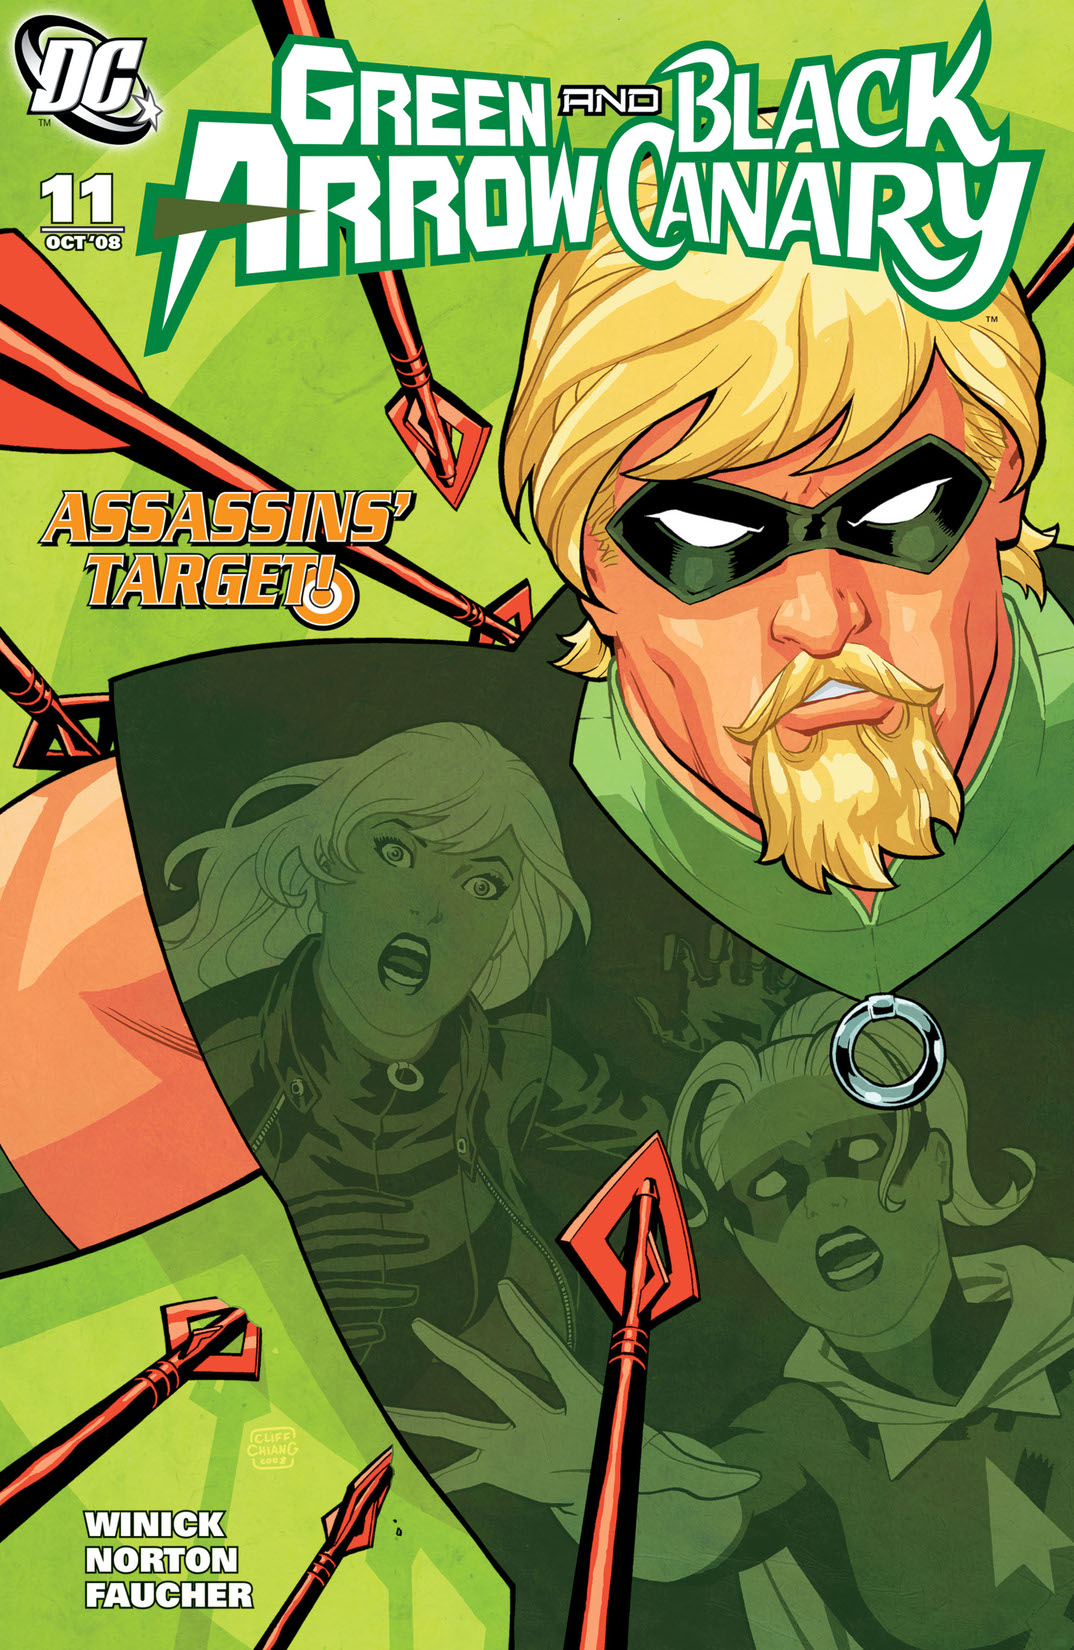 Green Arrow and Black Canary #11 preview images